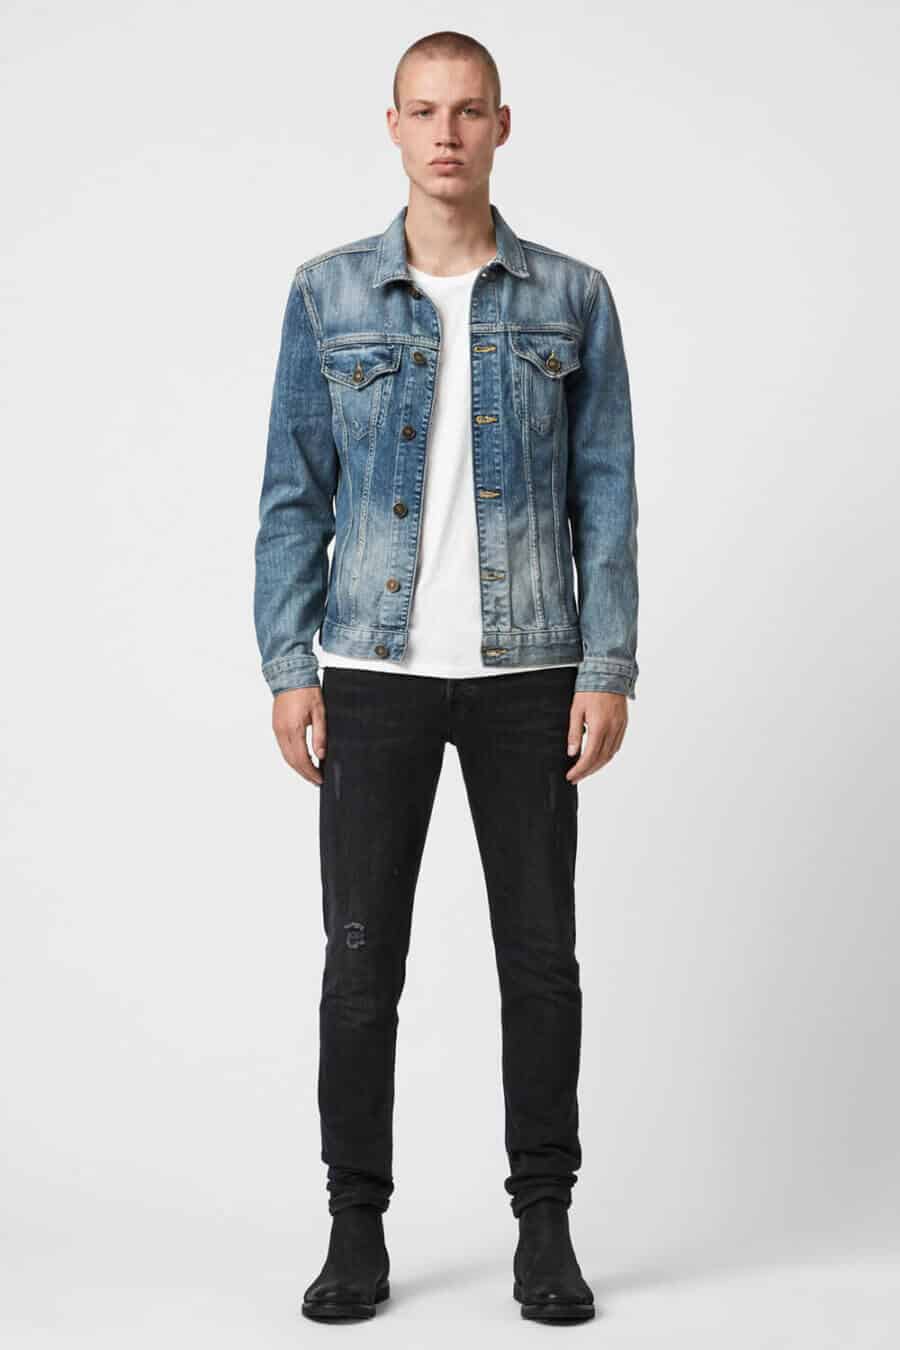 Double denim outfit for men - light wash jacket with black jeans and chelsea boots